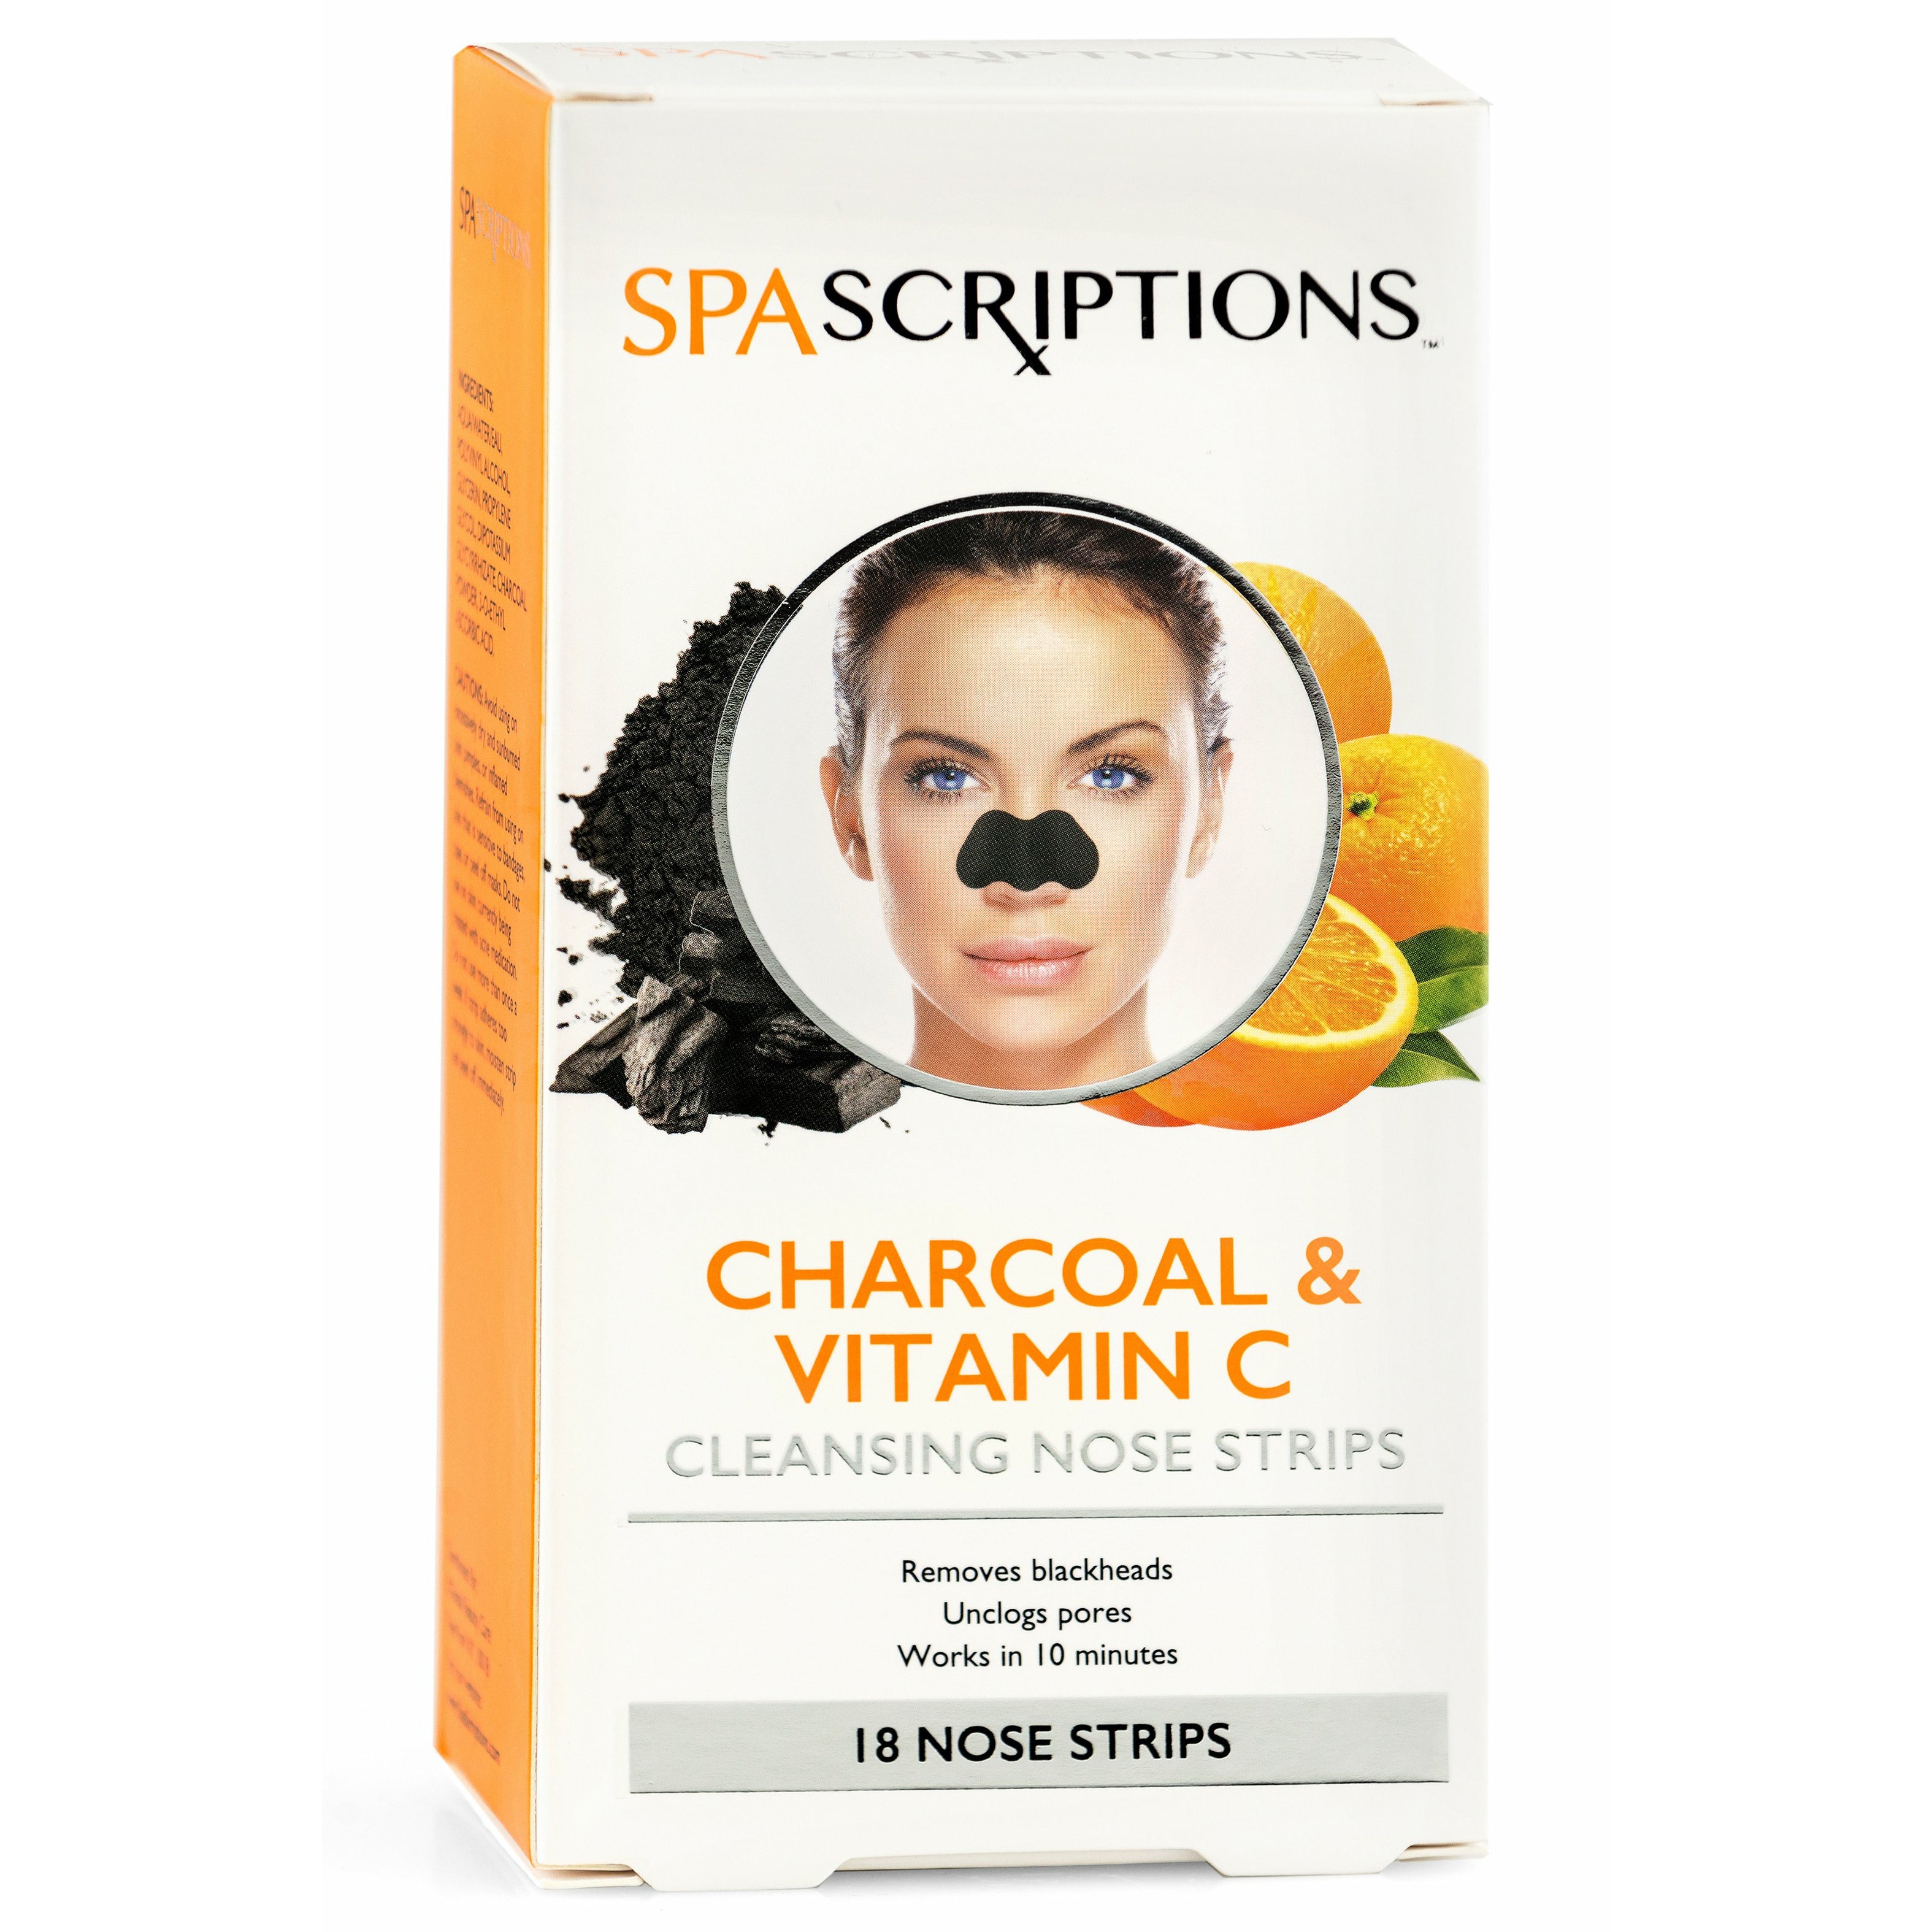 Charcoal & Vitamin C Cleansing Nose Strips